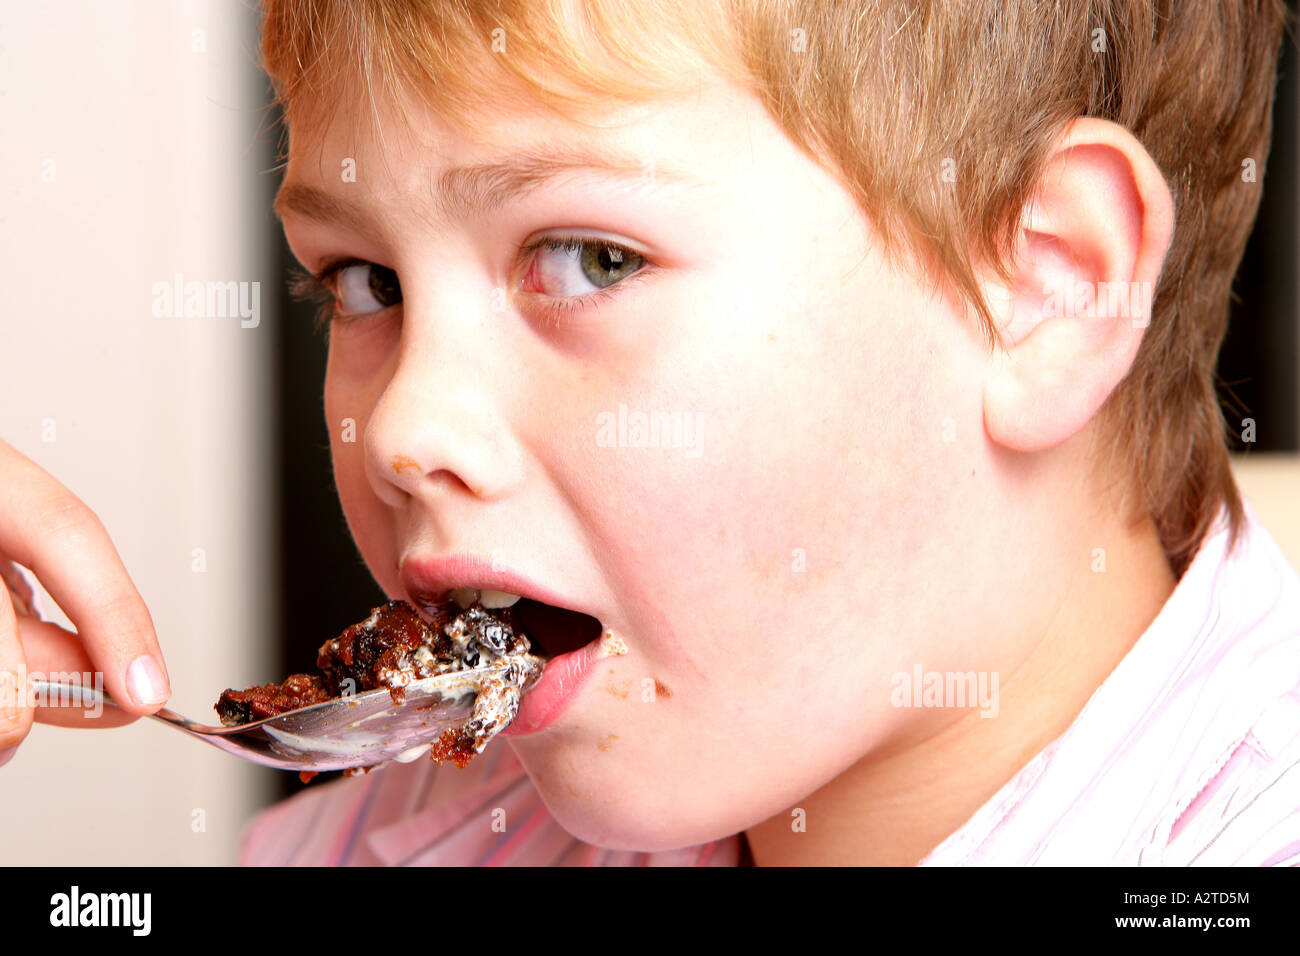 Young Boy Eating Christmas Pudding Model Released Stock Photo ...